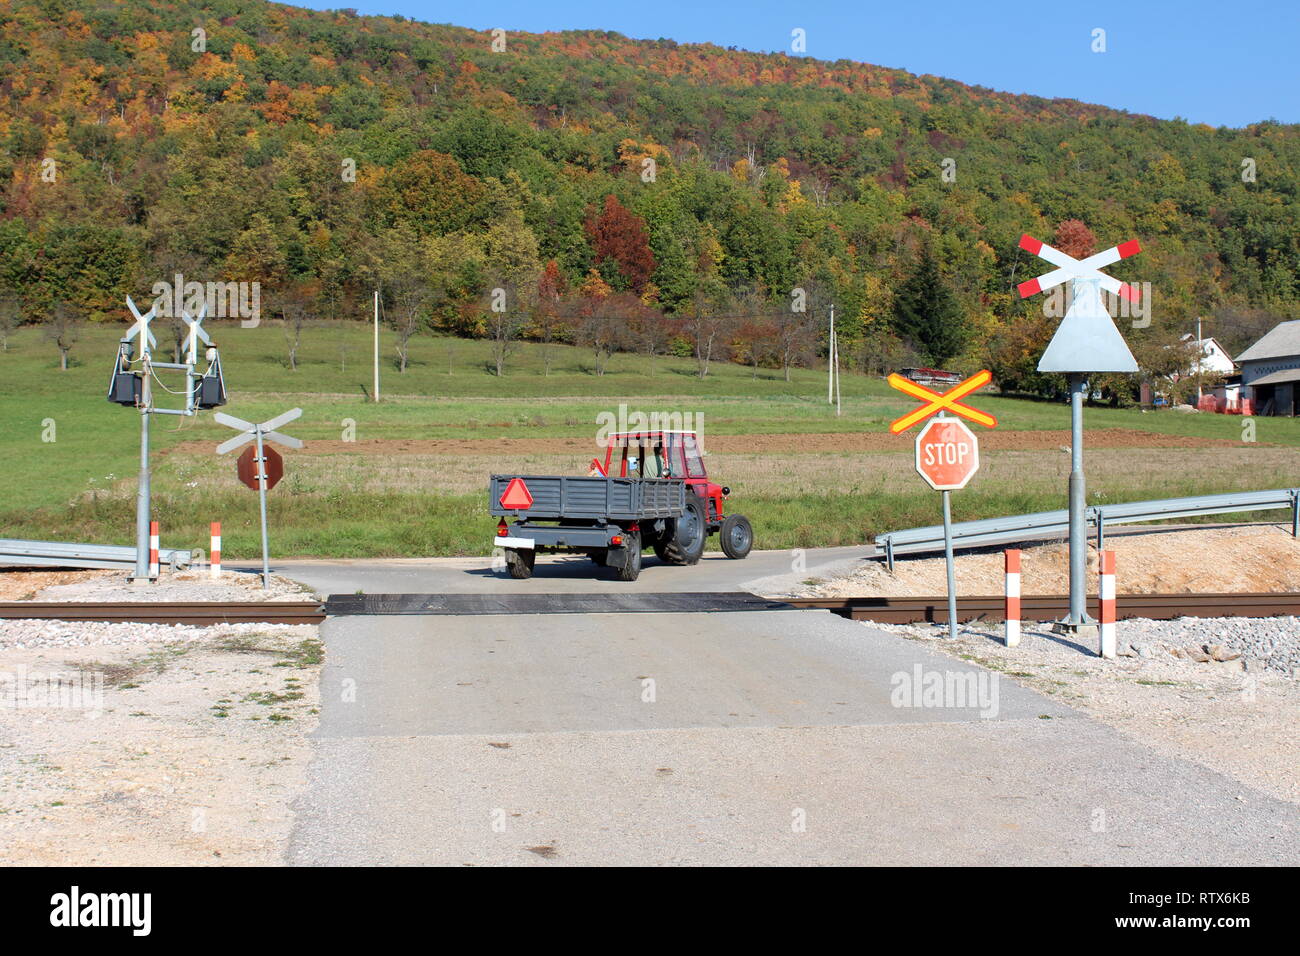 Tractor pulling trailer over railroad tracks crossing paved road surrounded  with stop and warning road signs with grass and colorful forest Stock Photo  - Alamy